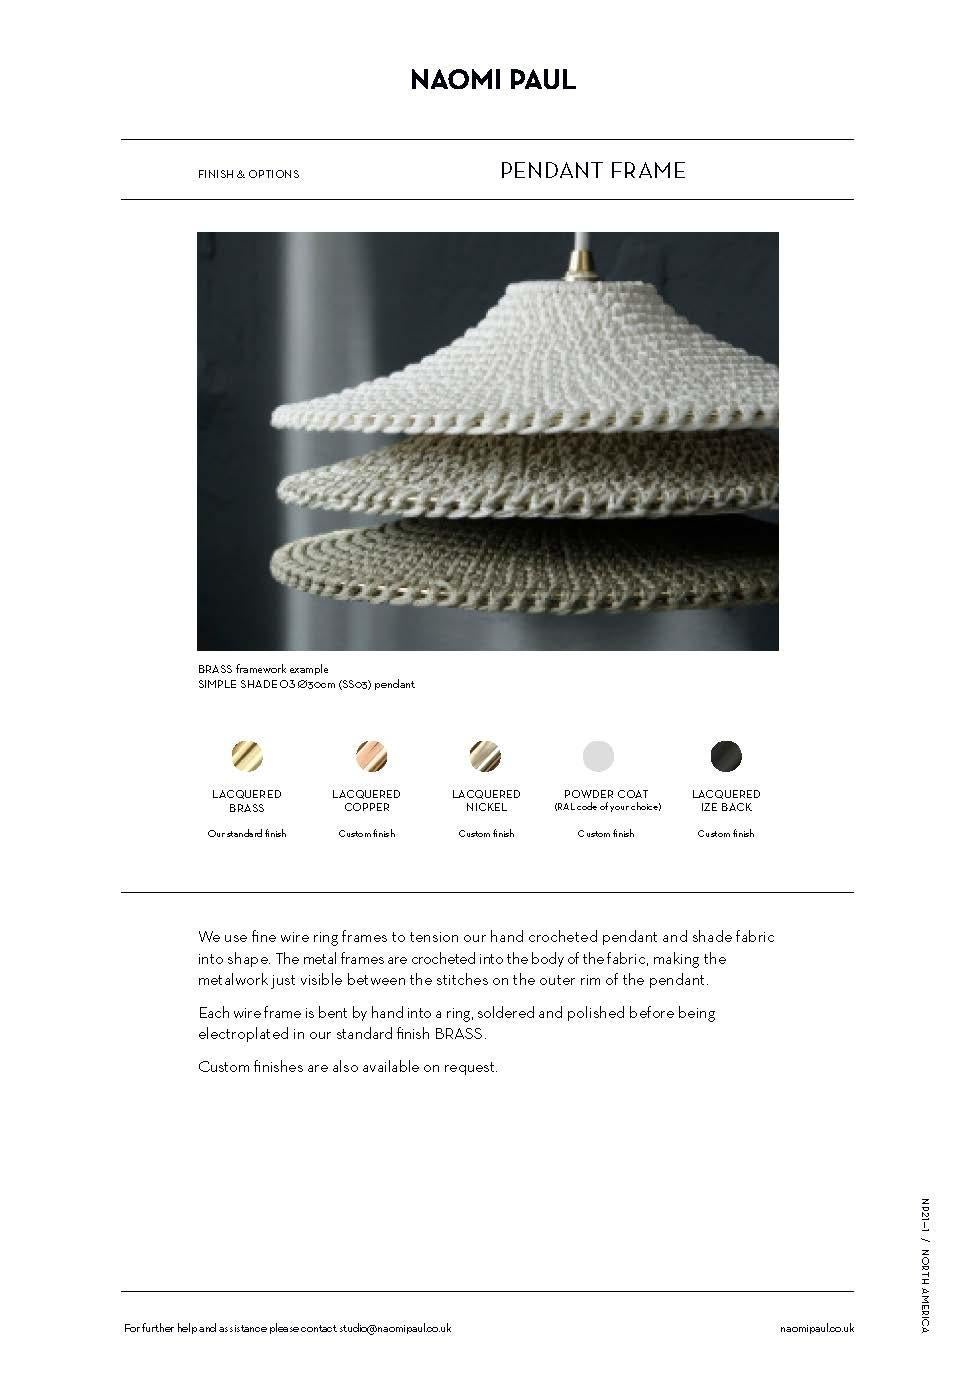 British BAMBOO SOLITAIRE 02 Pendant Light Ø50cm/19.7in, Hand Crocheted in Bamboo Paper